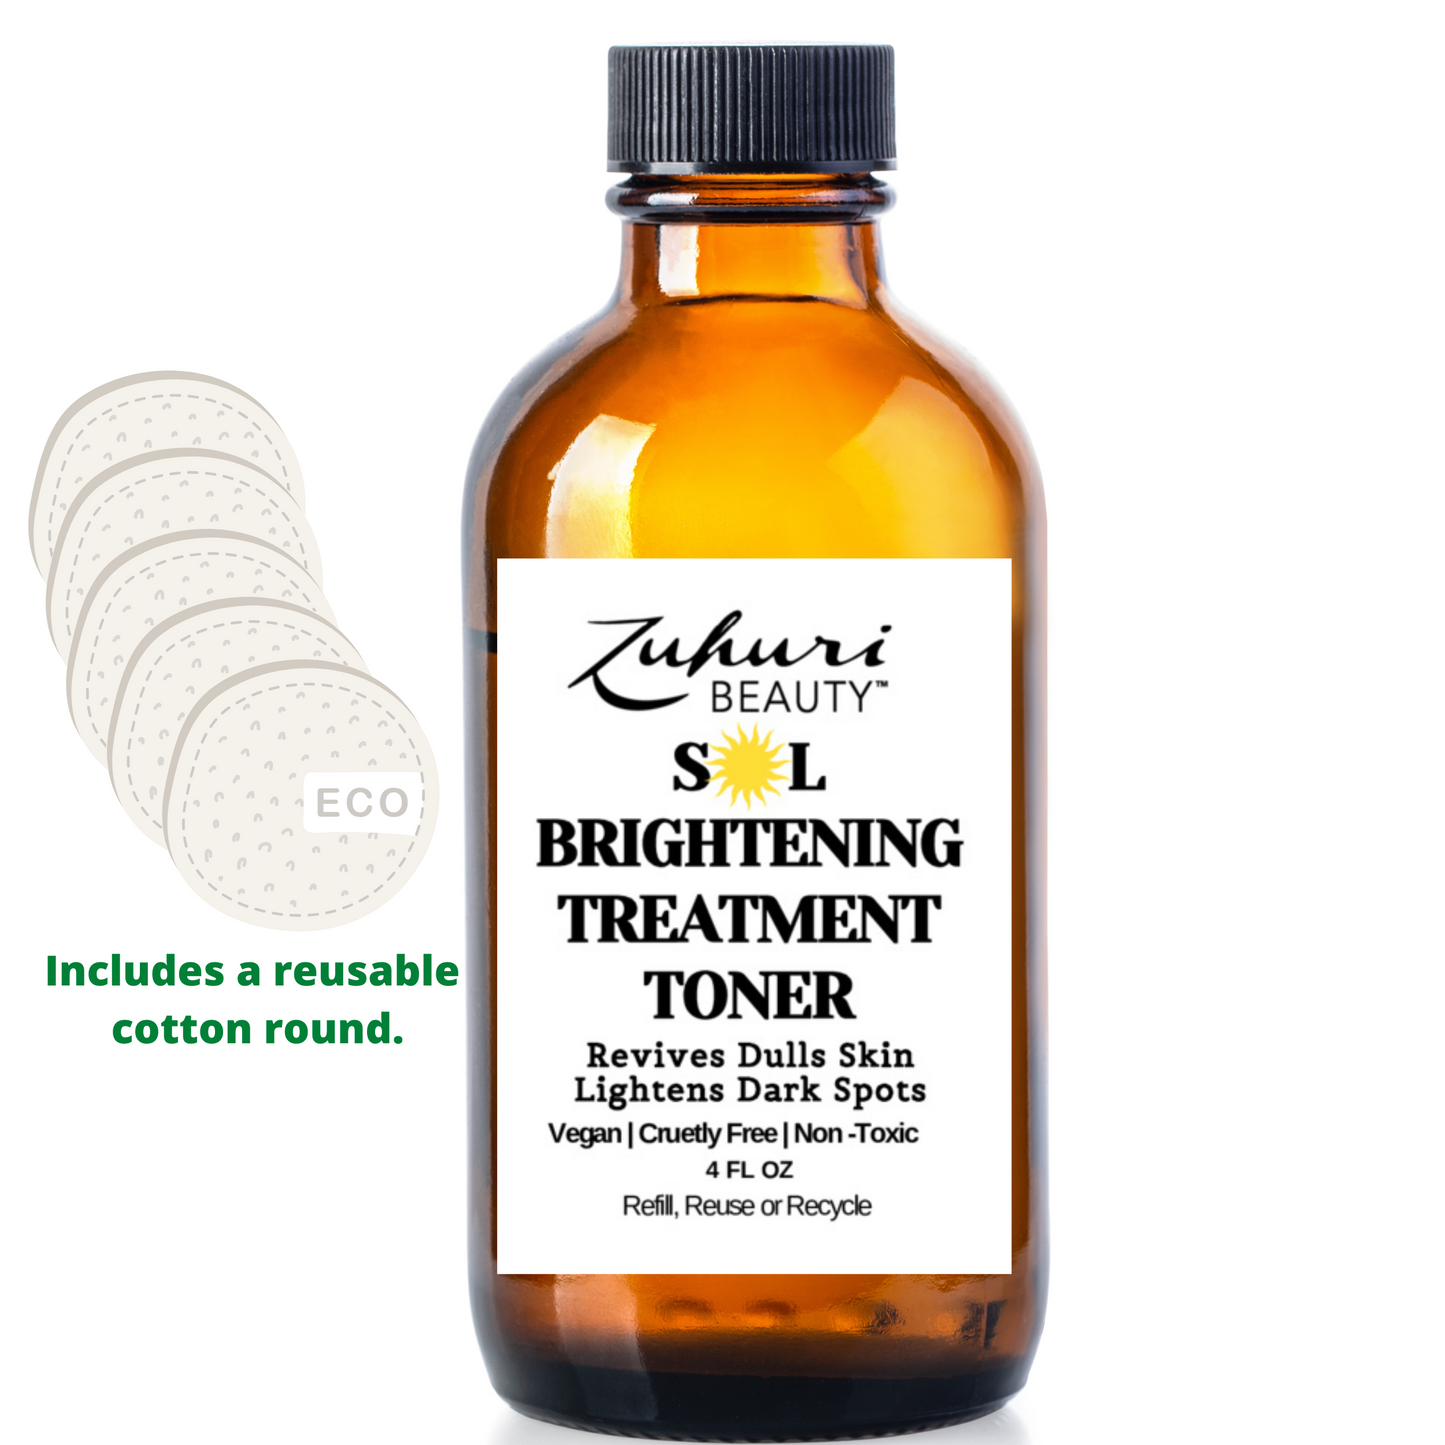 SOL Brightening Treatment Toner with Reusable Cotton Round